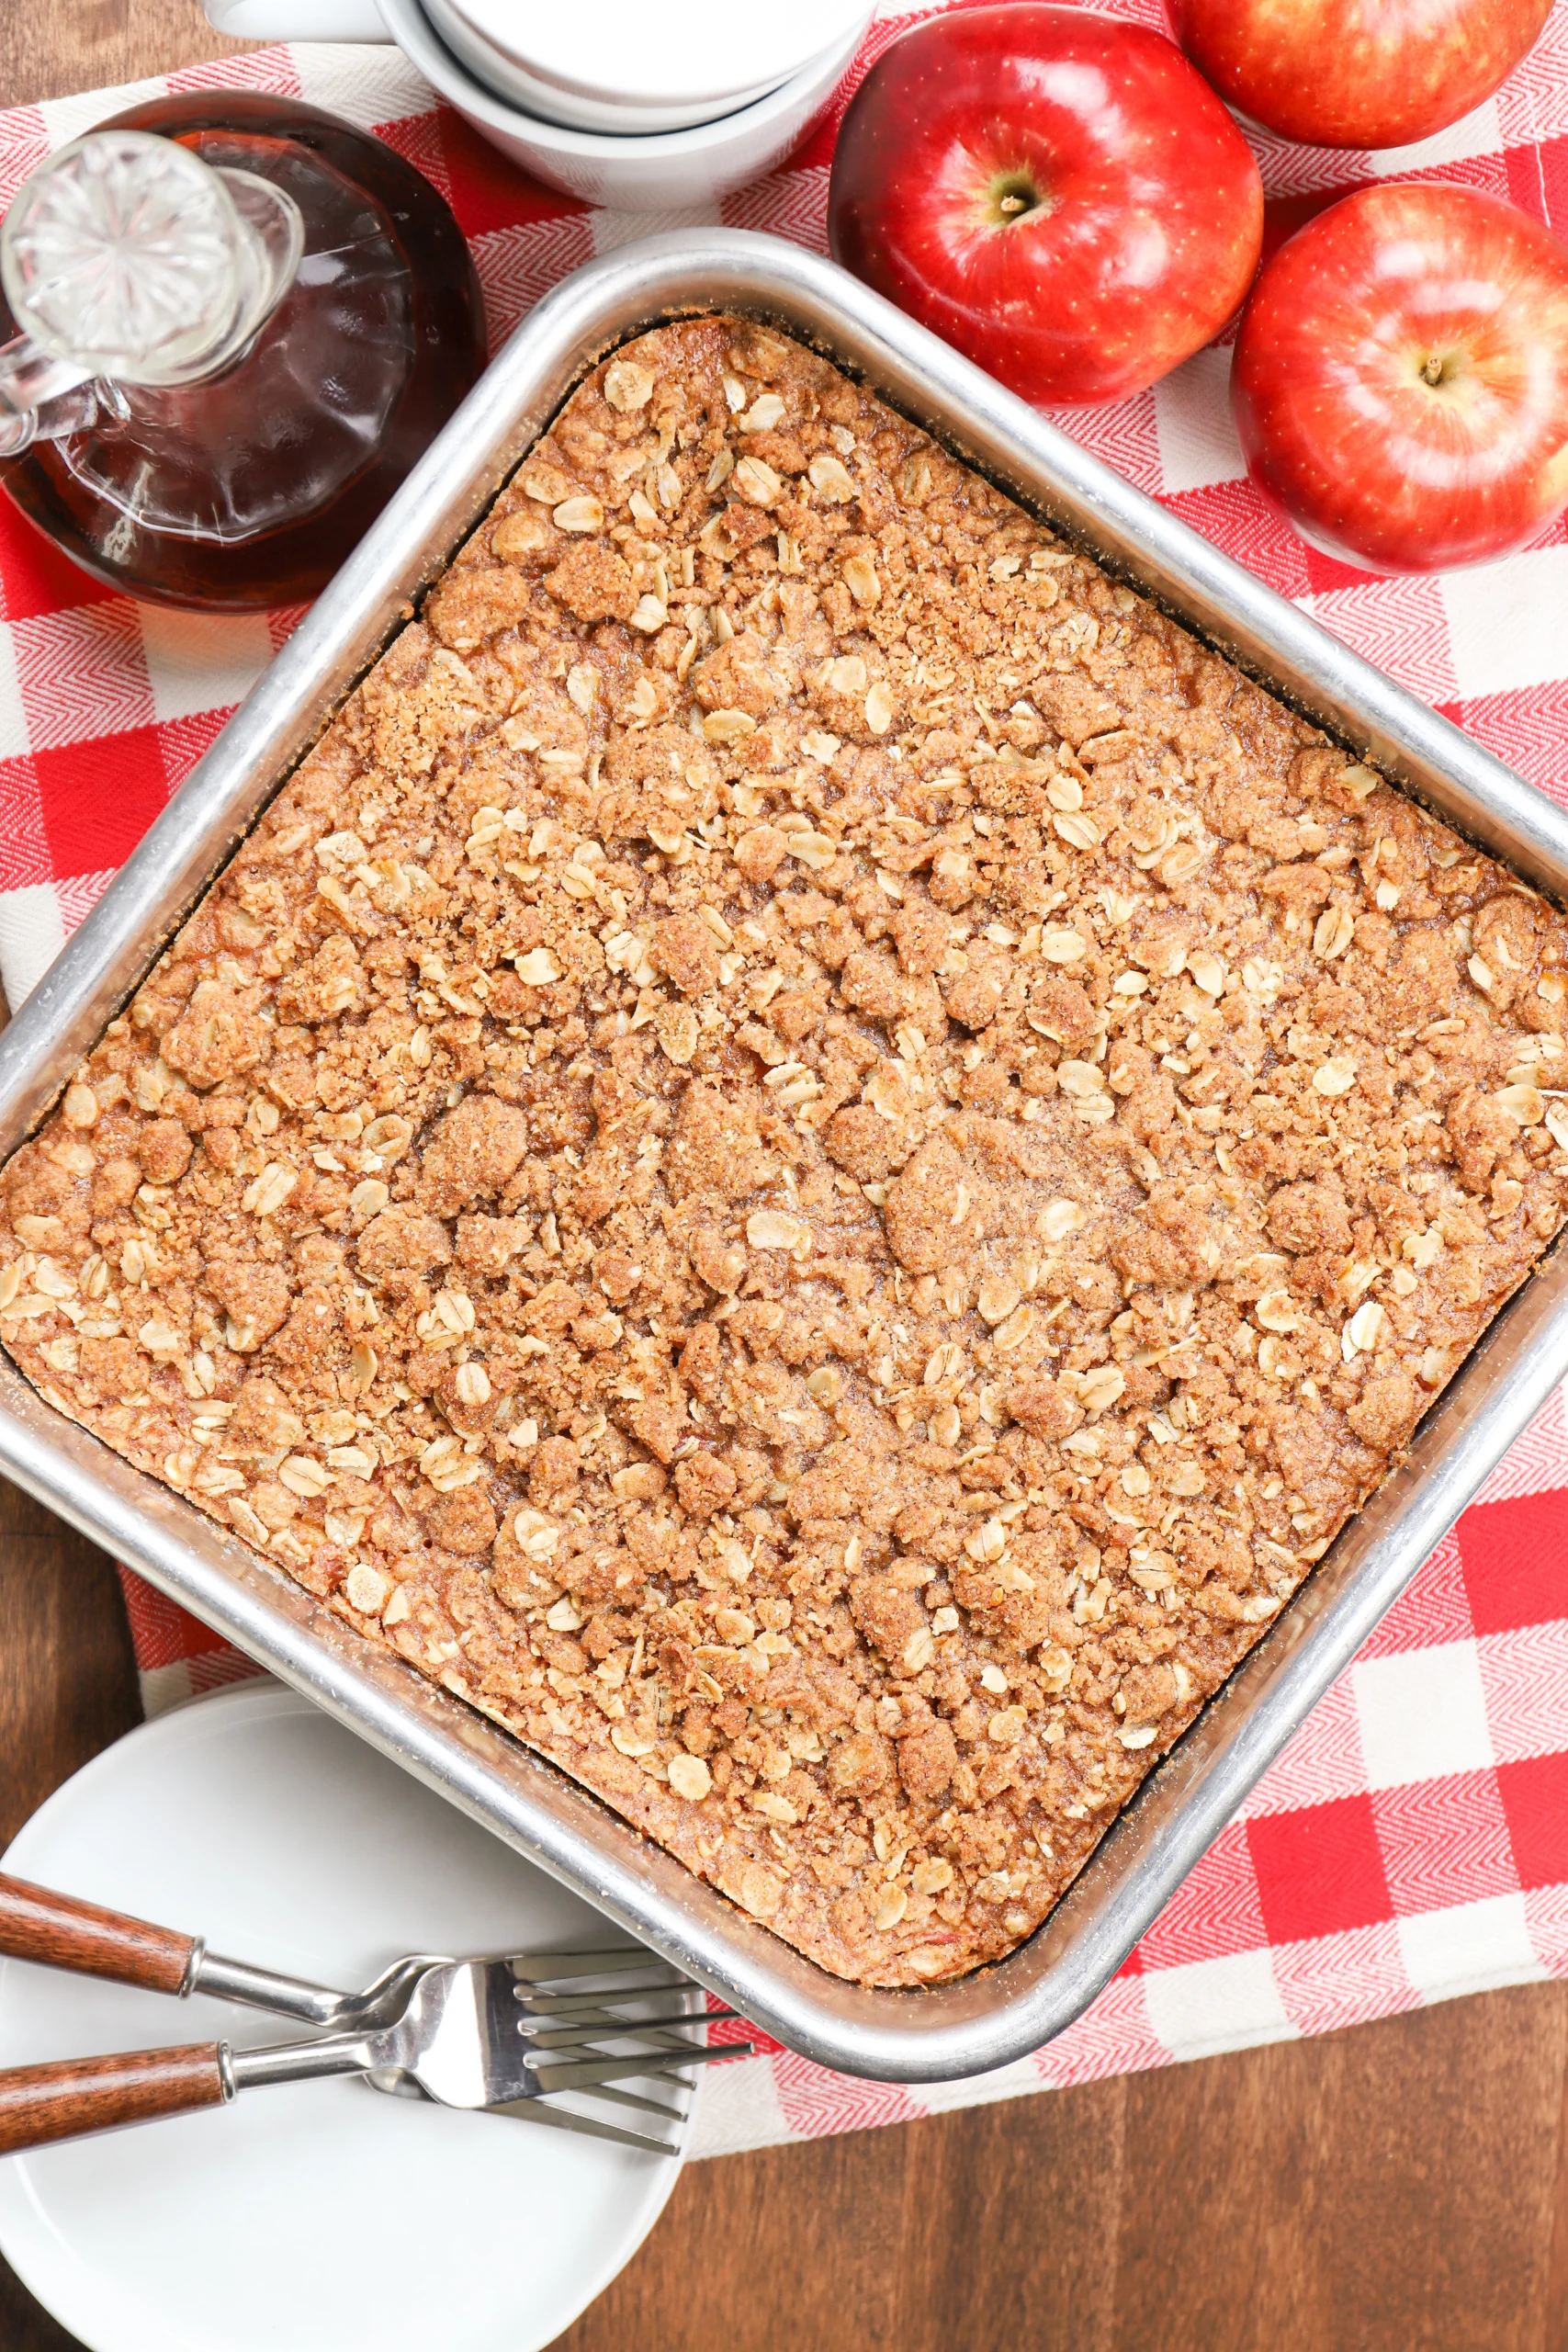 Overhead view of a pan of apple streusel baked oatmeal right out of the oven on a red checked towel.